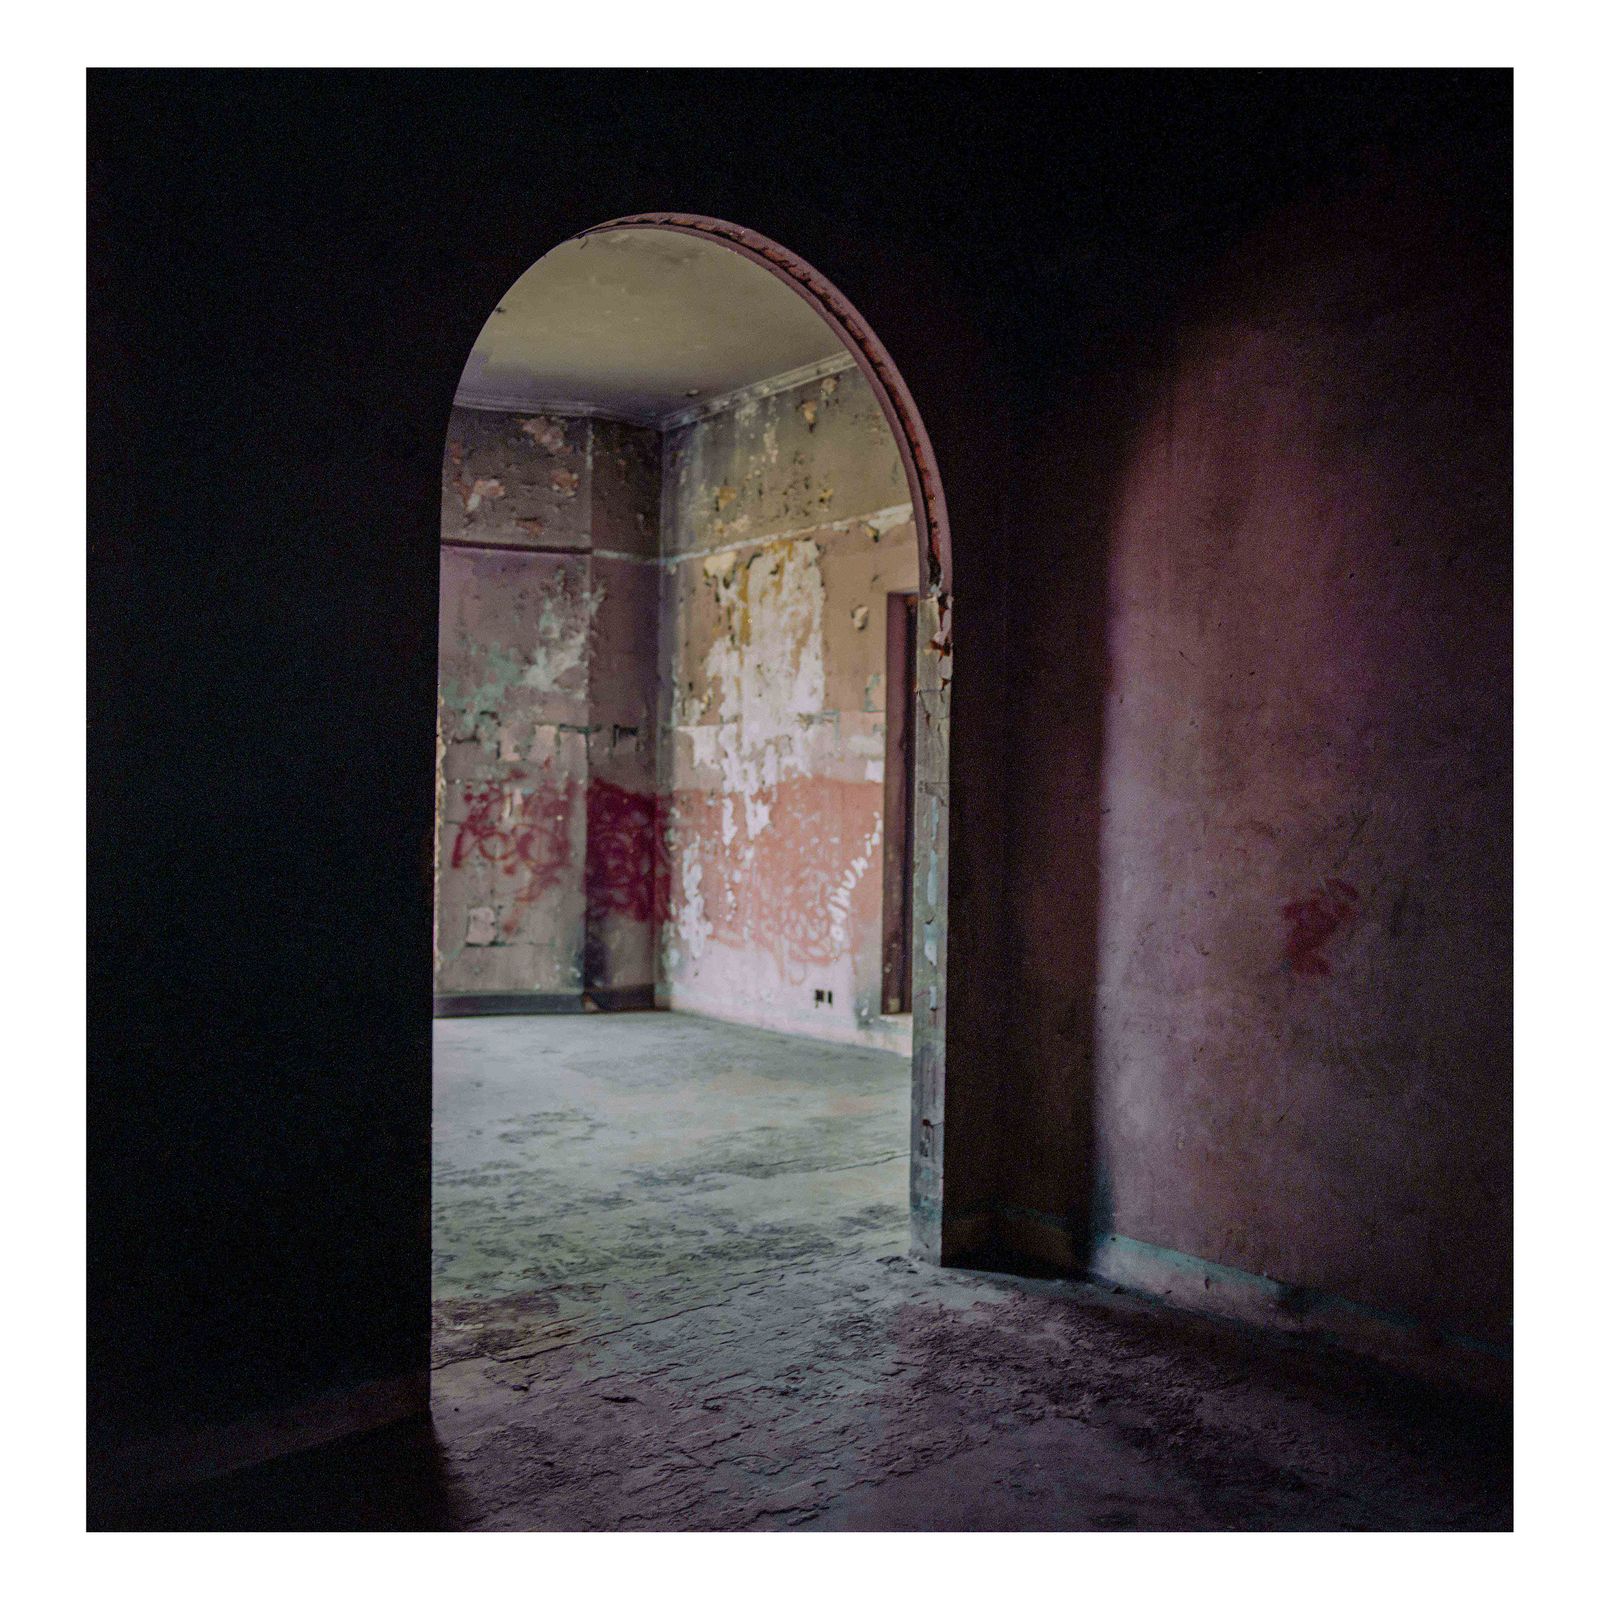 © Amilton Neves Cuna - Image from the Vila Algarve photography project